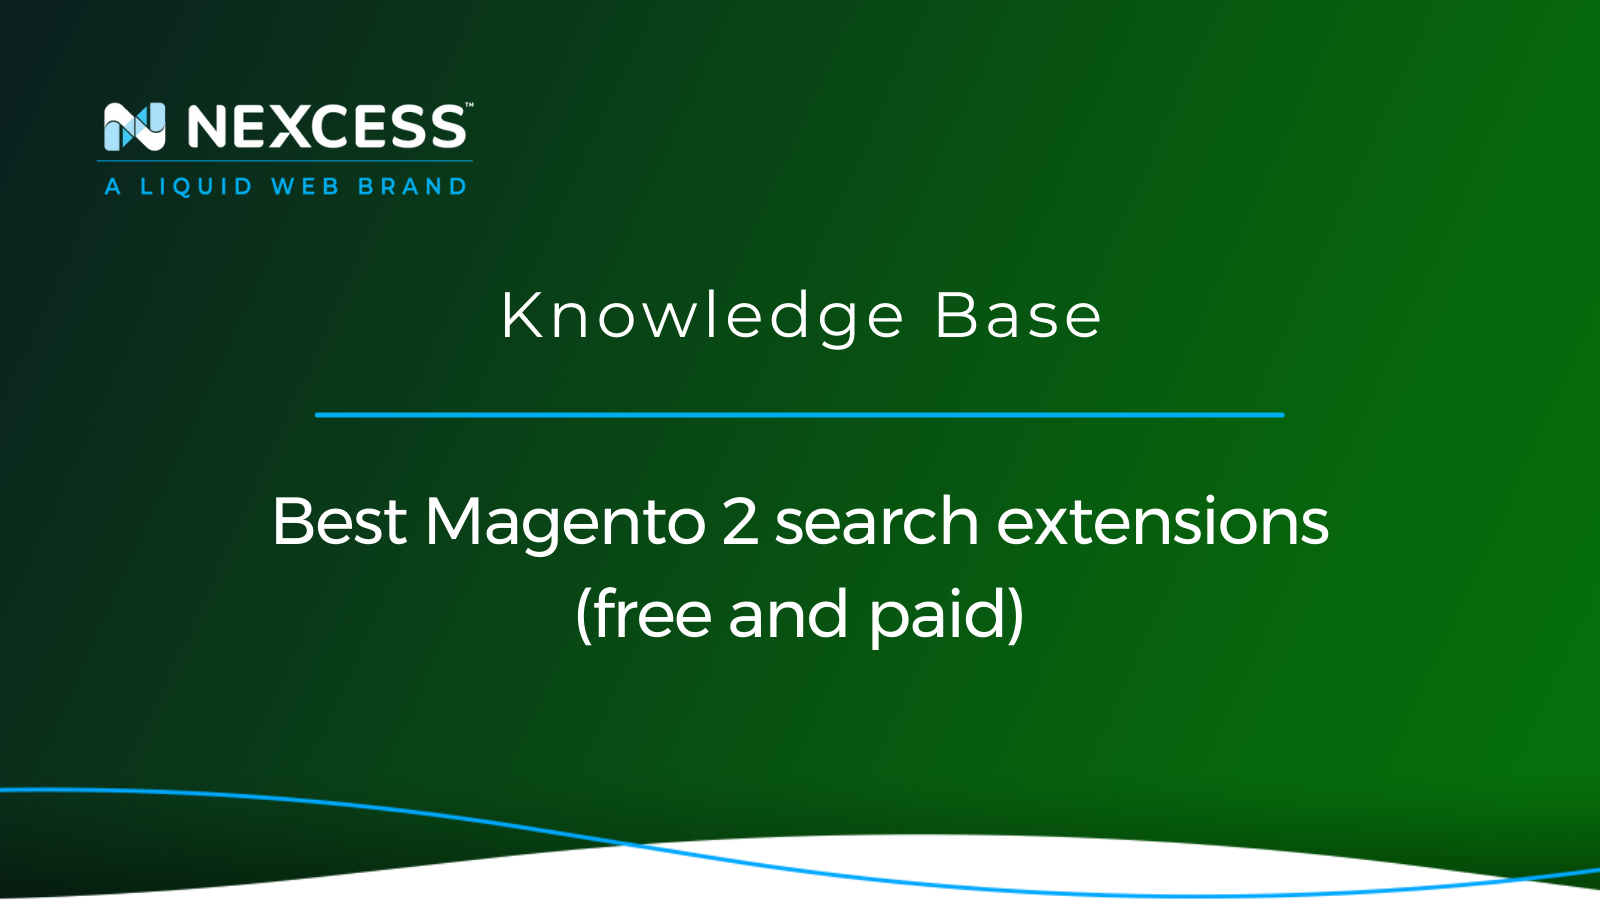 Best Magento 2 search extensions (free and paid)